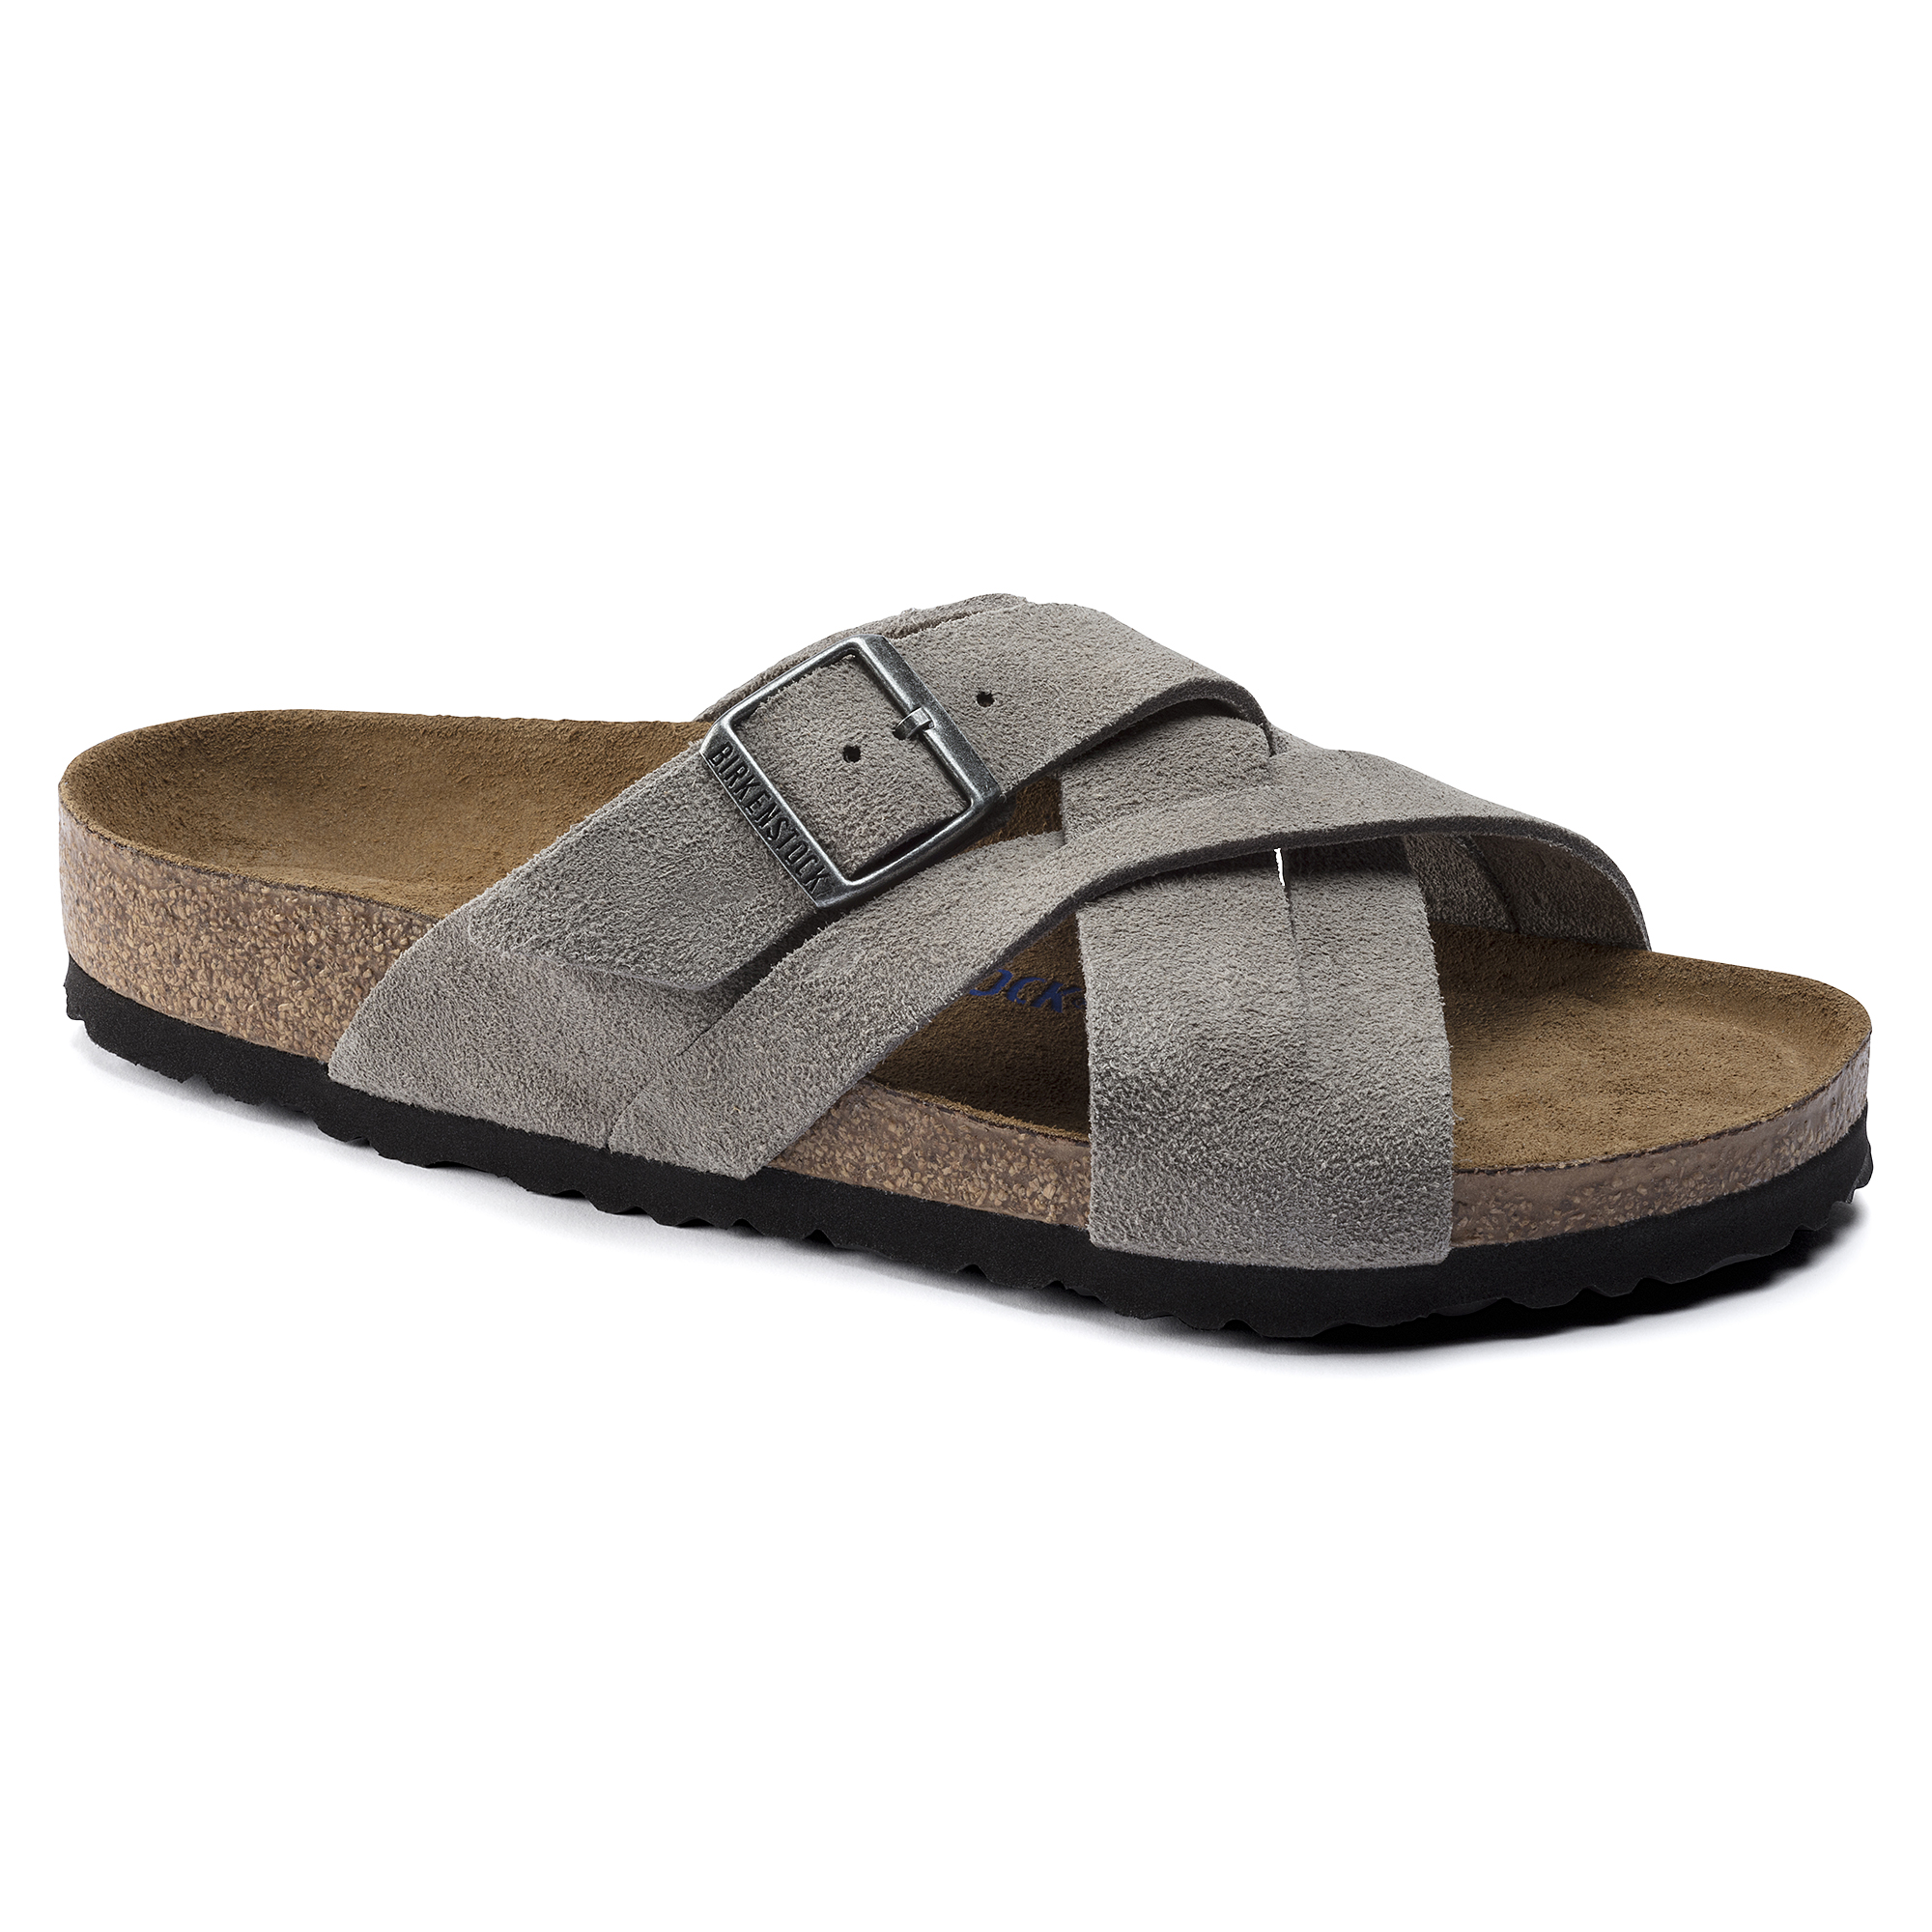 Lugano Soft Footbed Suede Leather Stone Coin | BIRKENSTOCK